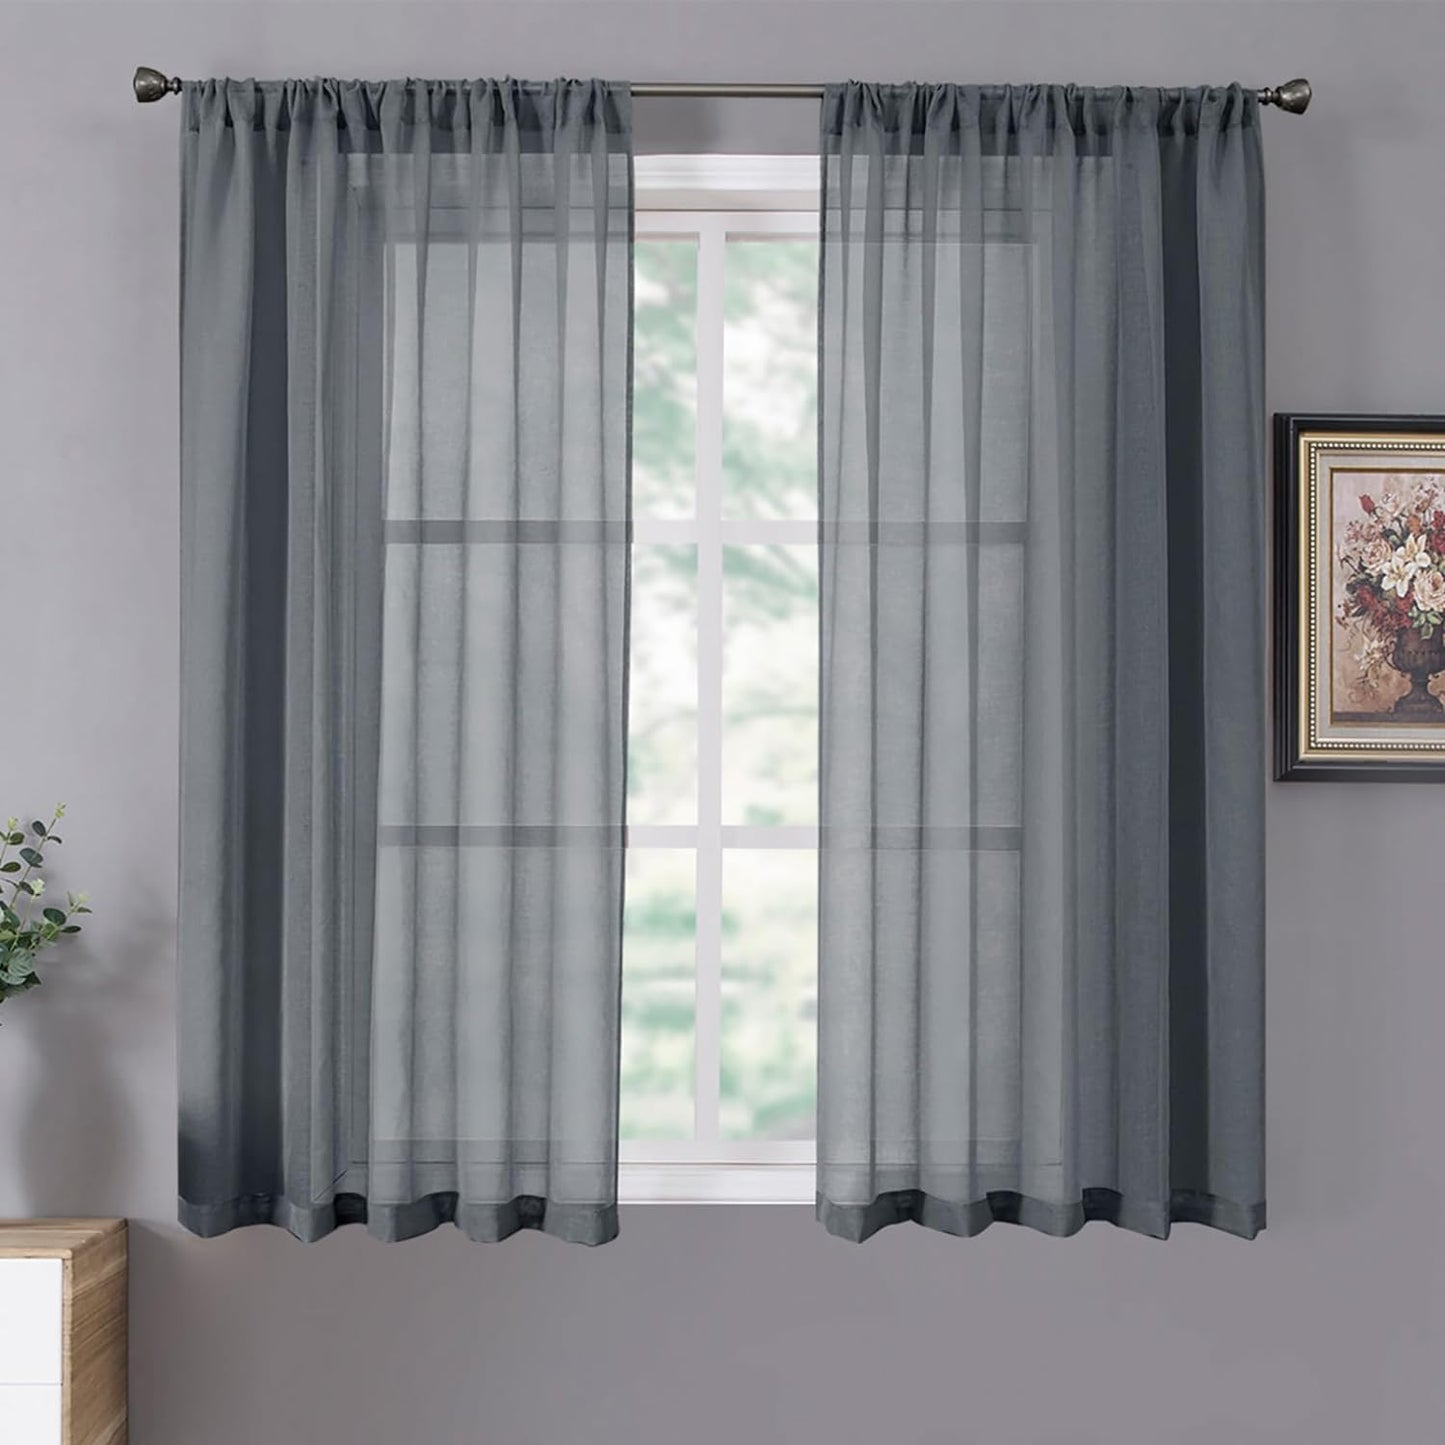 Tollpiz Short Sheer Curtains Linen Textured Bedroom Curtain Sheers Light Filtering Rod Pocket Voile Curtains for Living Room, 54 X 45 Inches Long, White, Set of 2 Panels  Tollpiz Tex Dark Grey 42"W X 54"L 